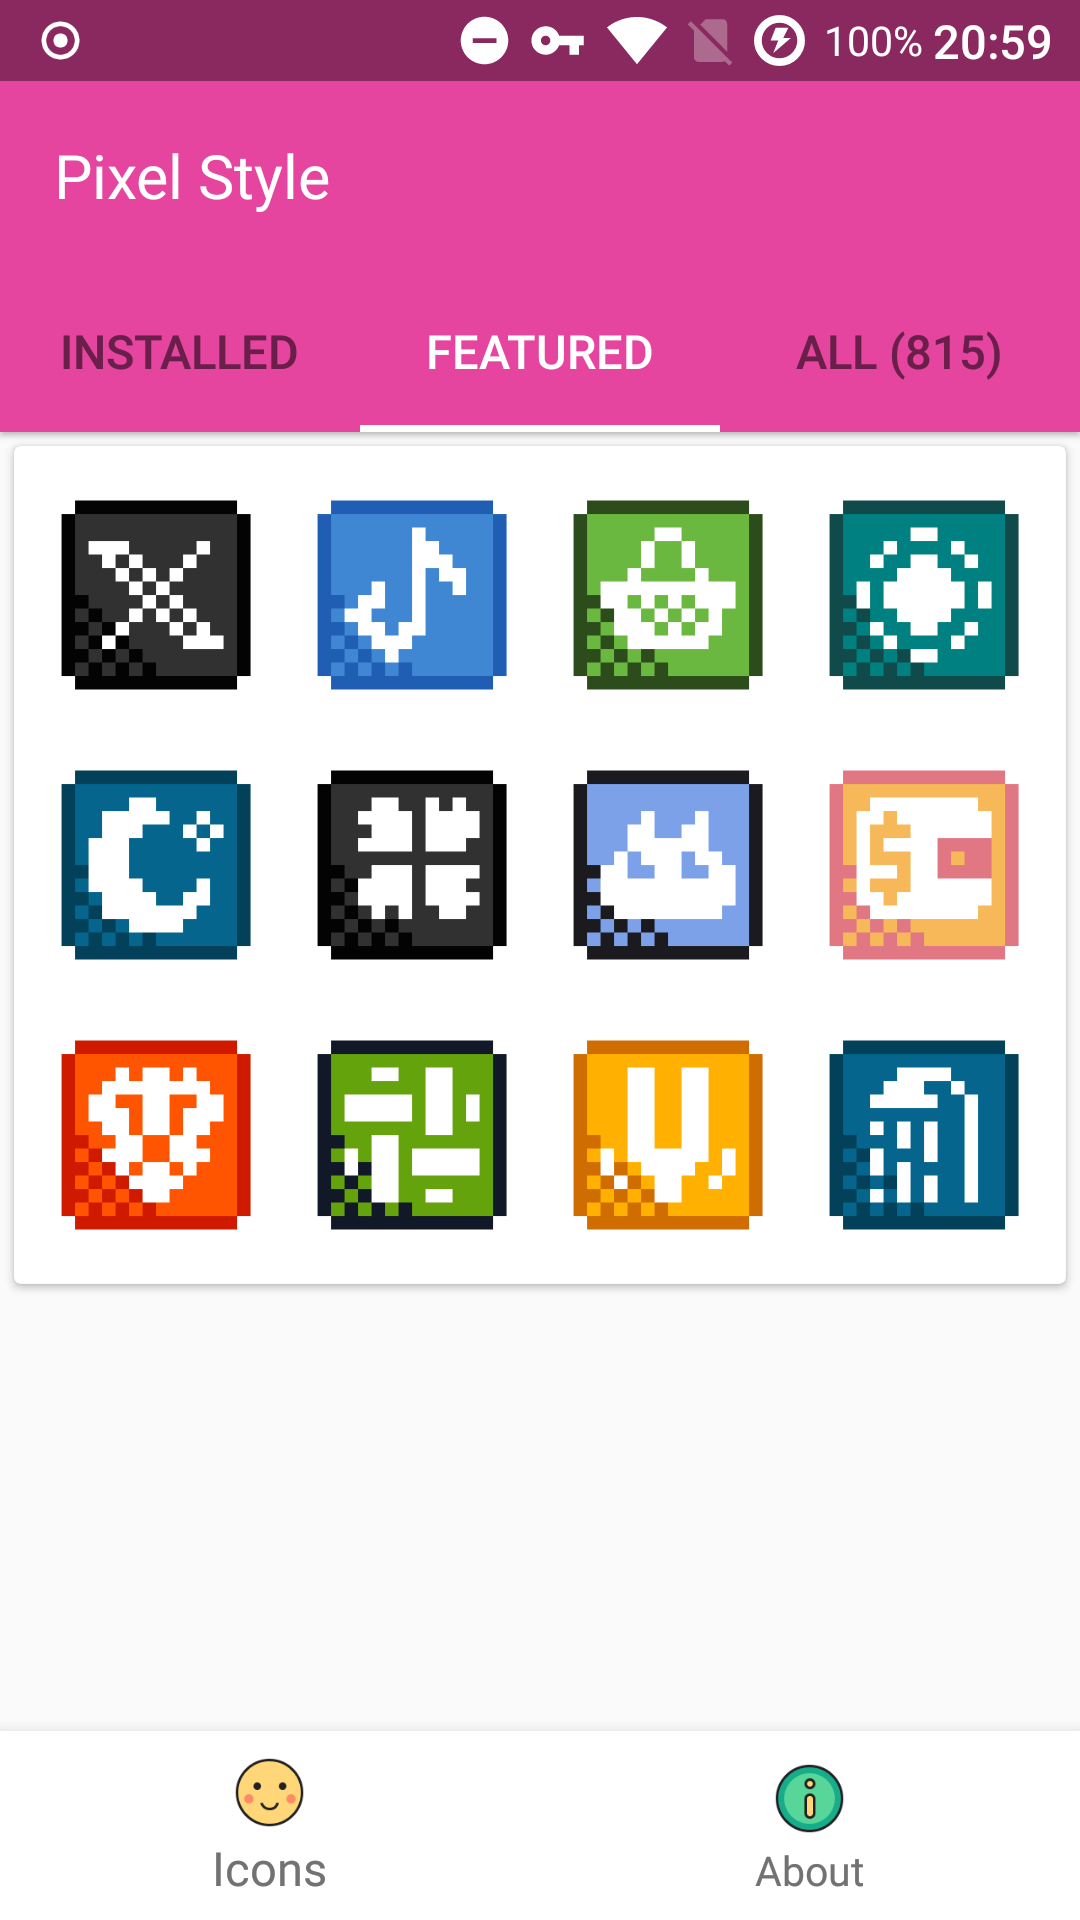 New PixelStyle update with 12 new icons!